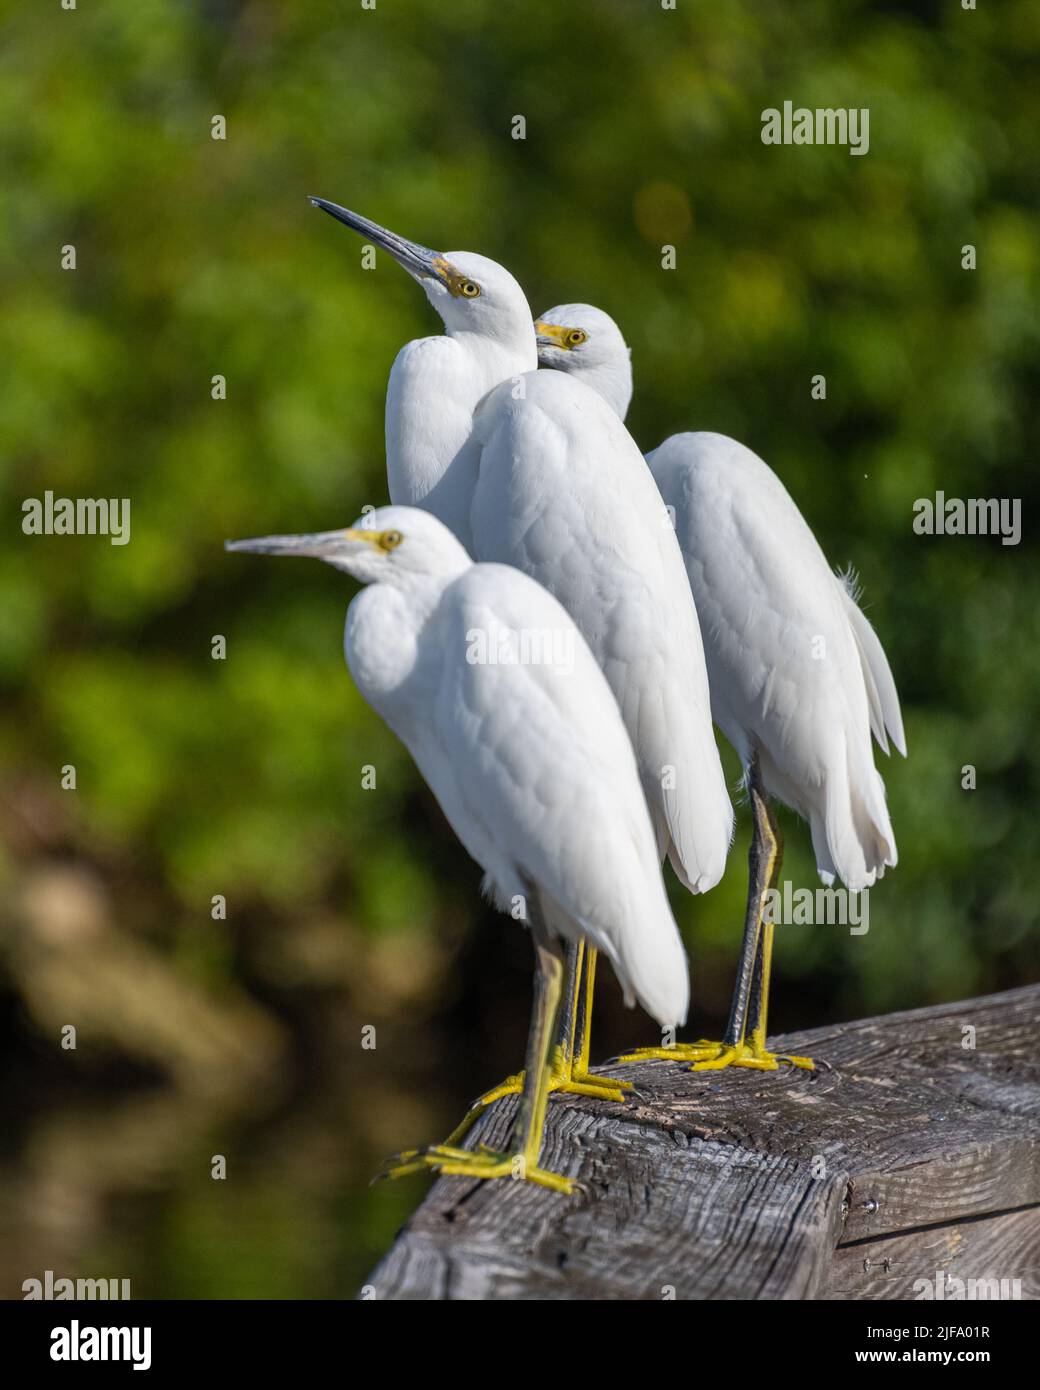 Snowy Egrets perched on a boardwalk.  Snowy Egrets were hunted nearly to extinction for their wispy feathers. Stock Photo